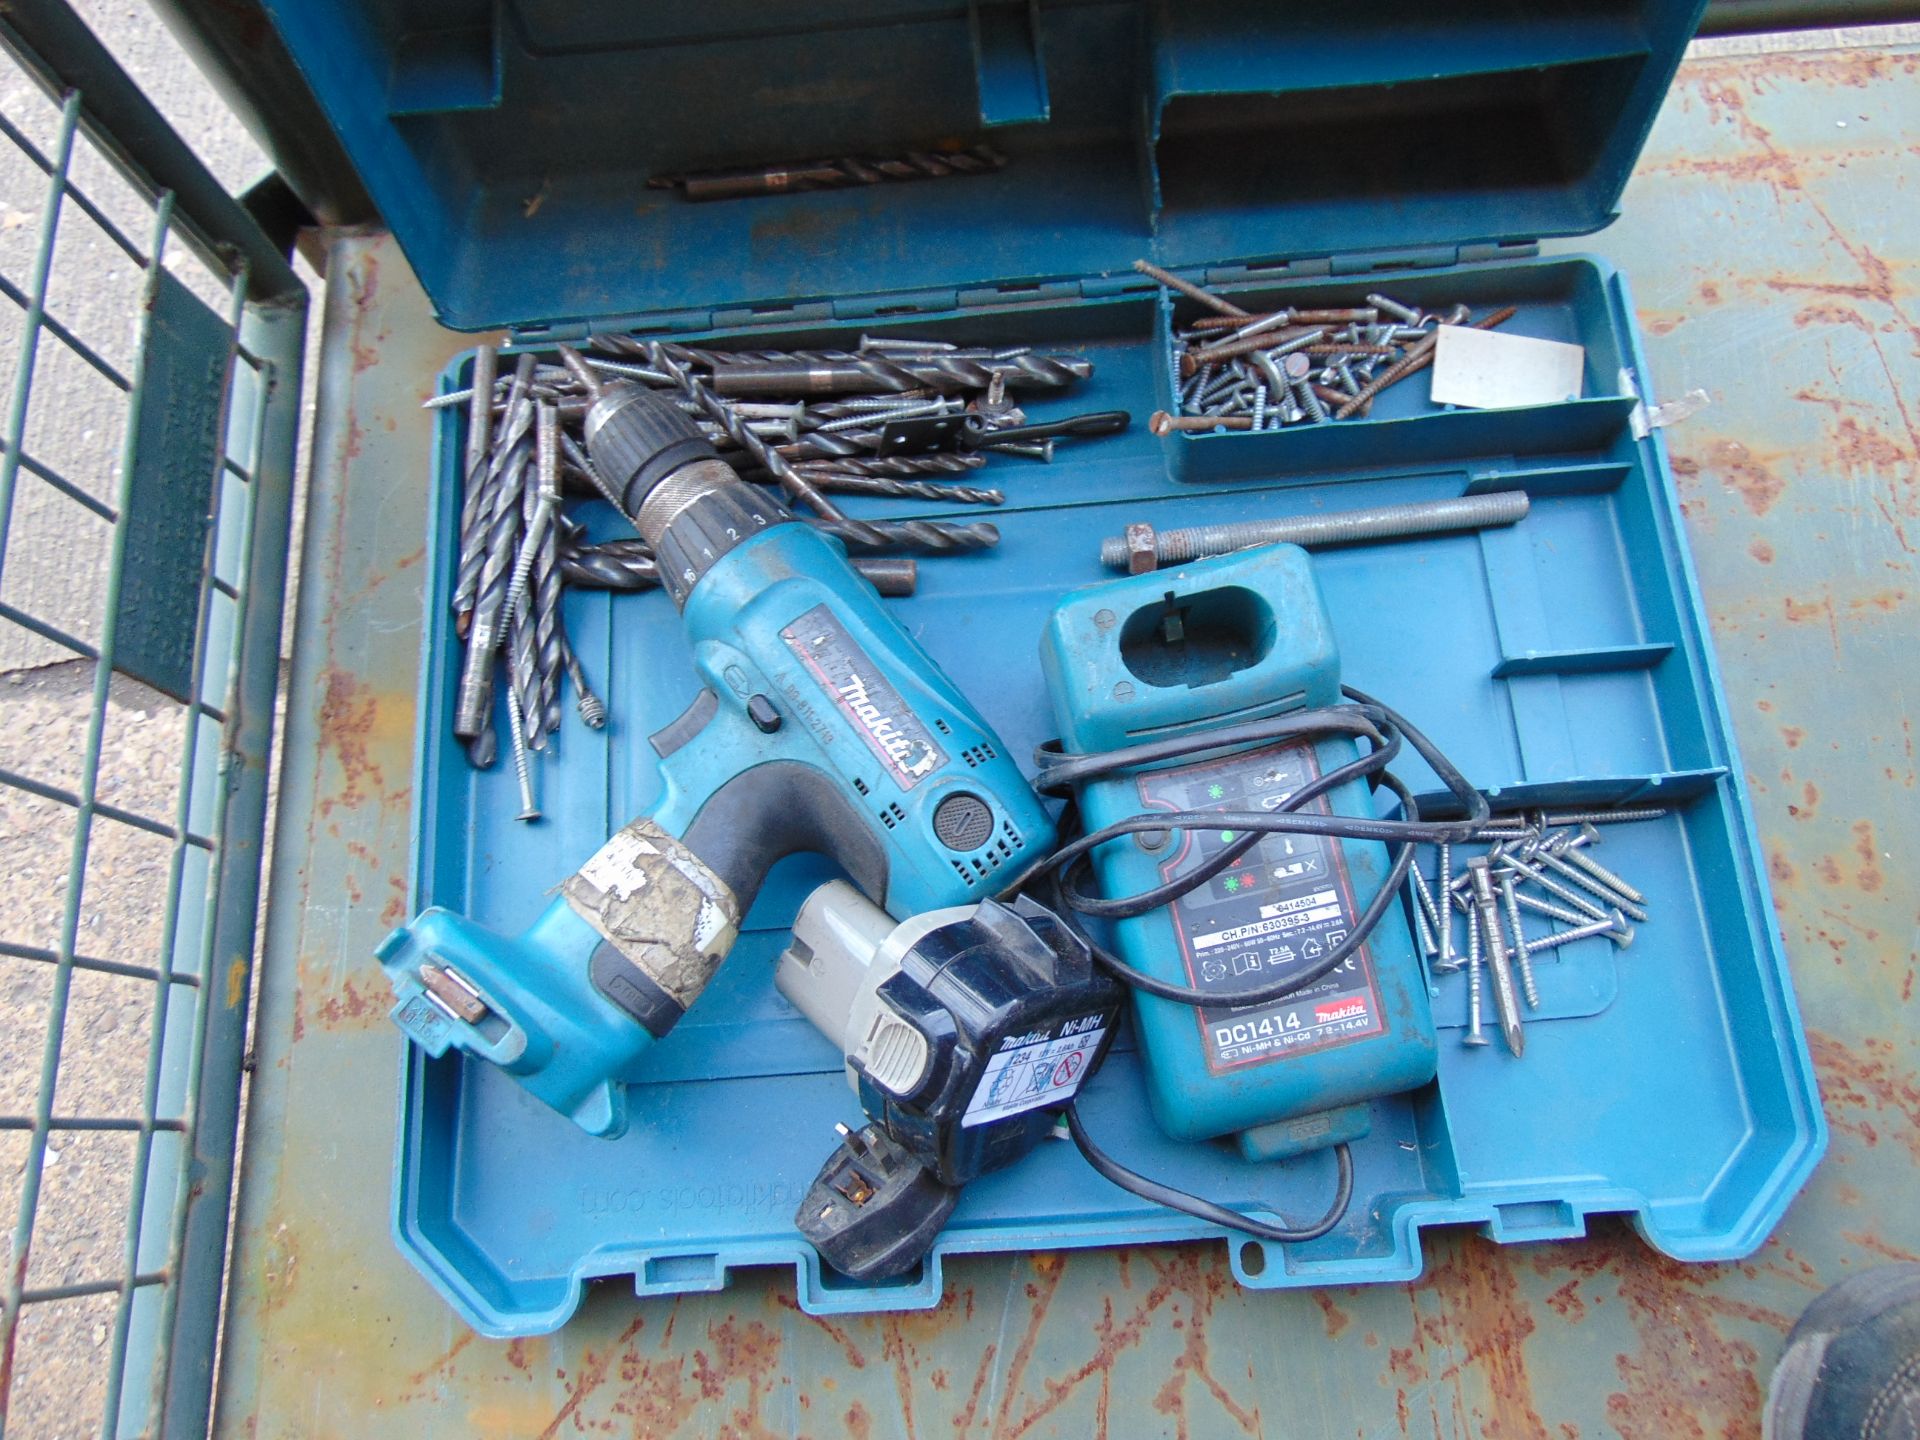 Makita 12 Volt Drill and Charger Drills etc